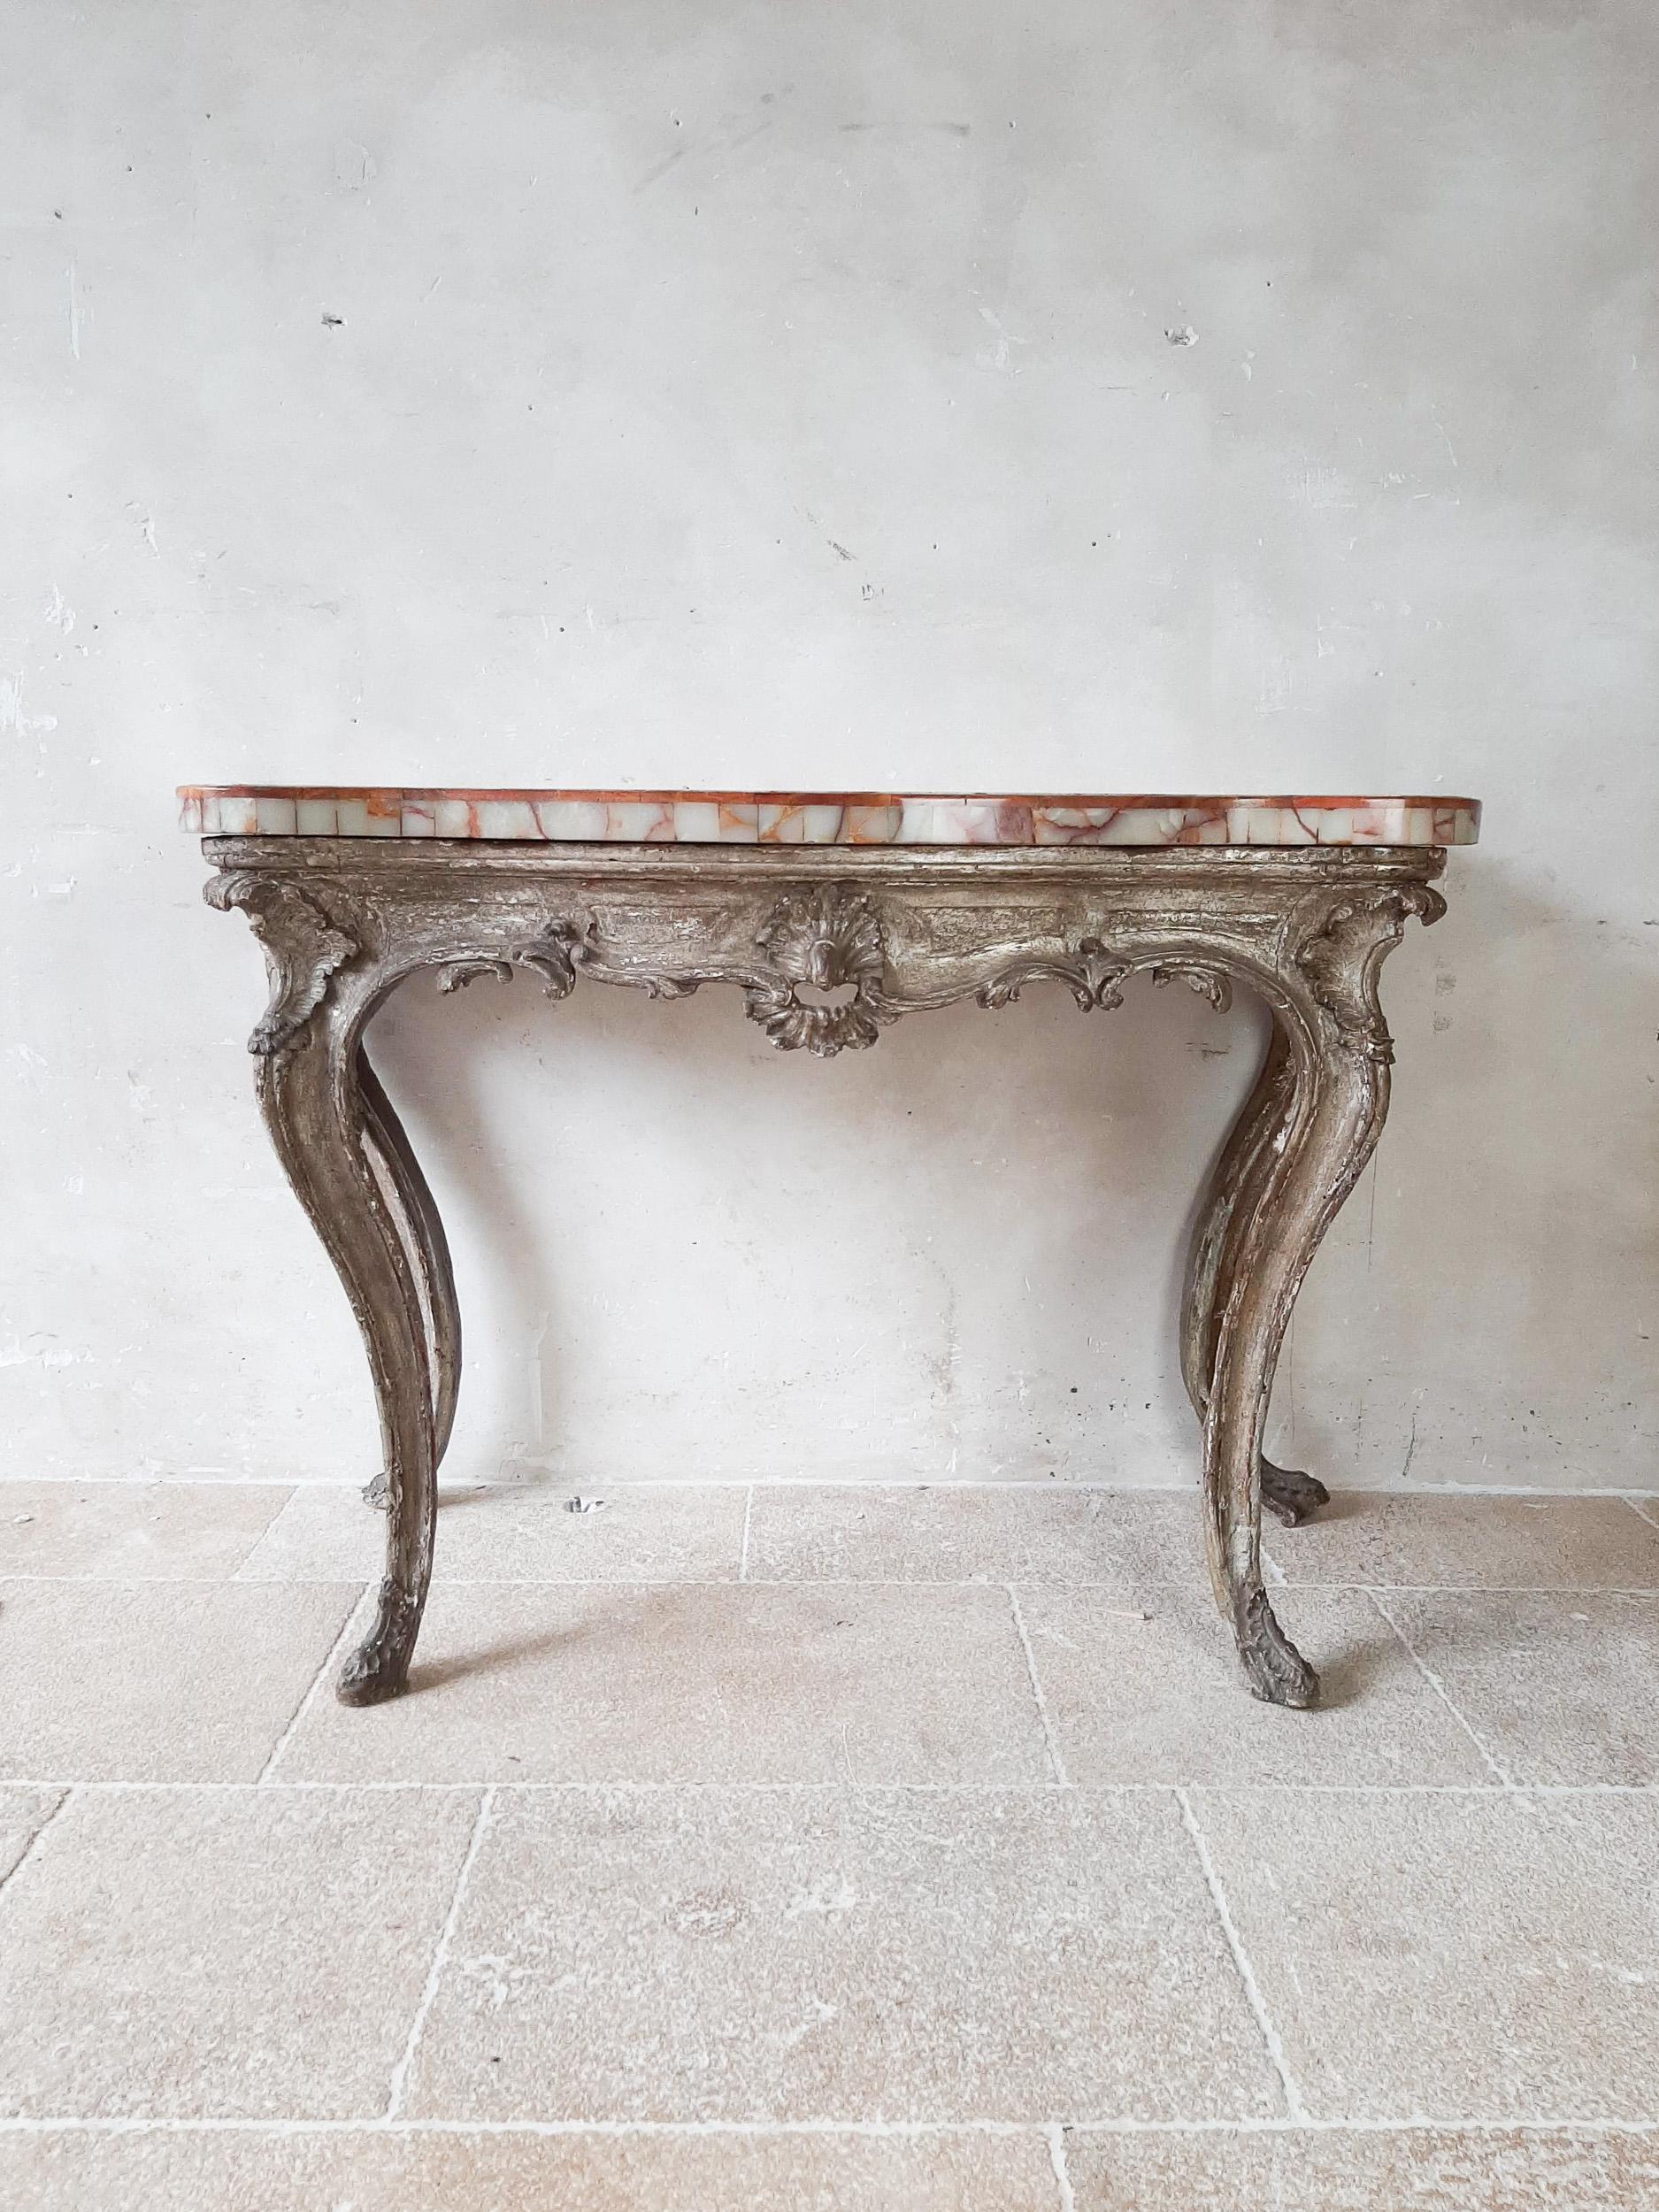 An 18th century Rococo style console table. A beautiful antique carved wood and gesso table with old golden patina and a top from Onyx marble in creme and red / amber tonesen.

Measures: H 86 x W 133 x D 68 cm.